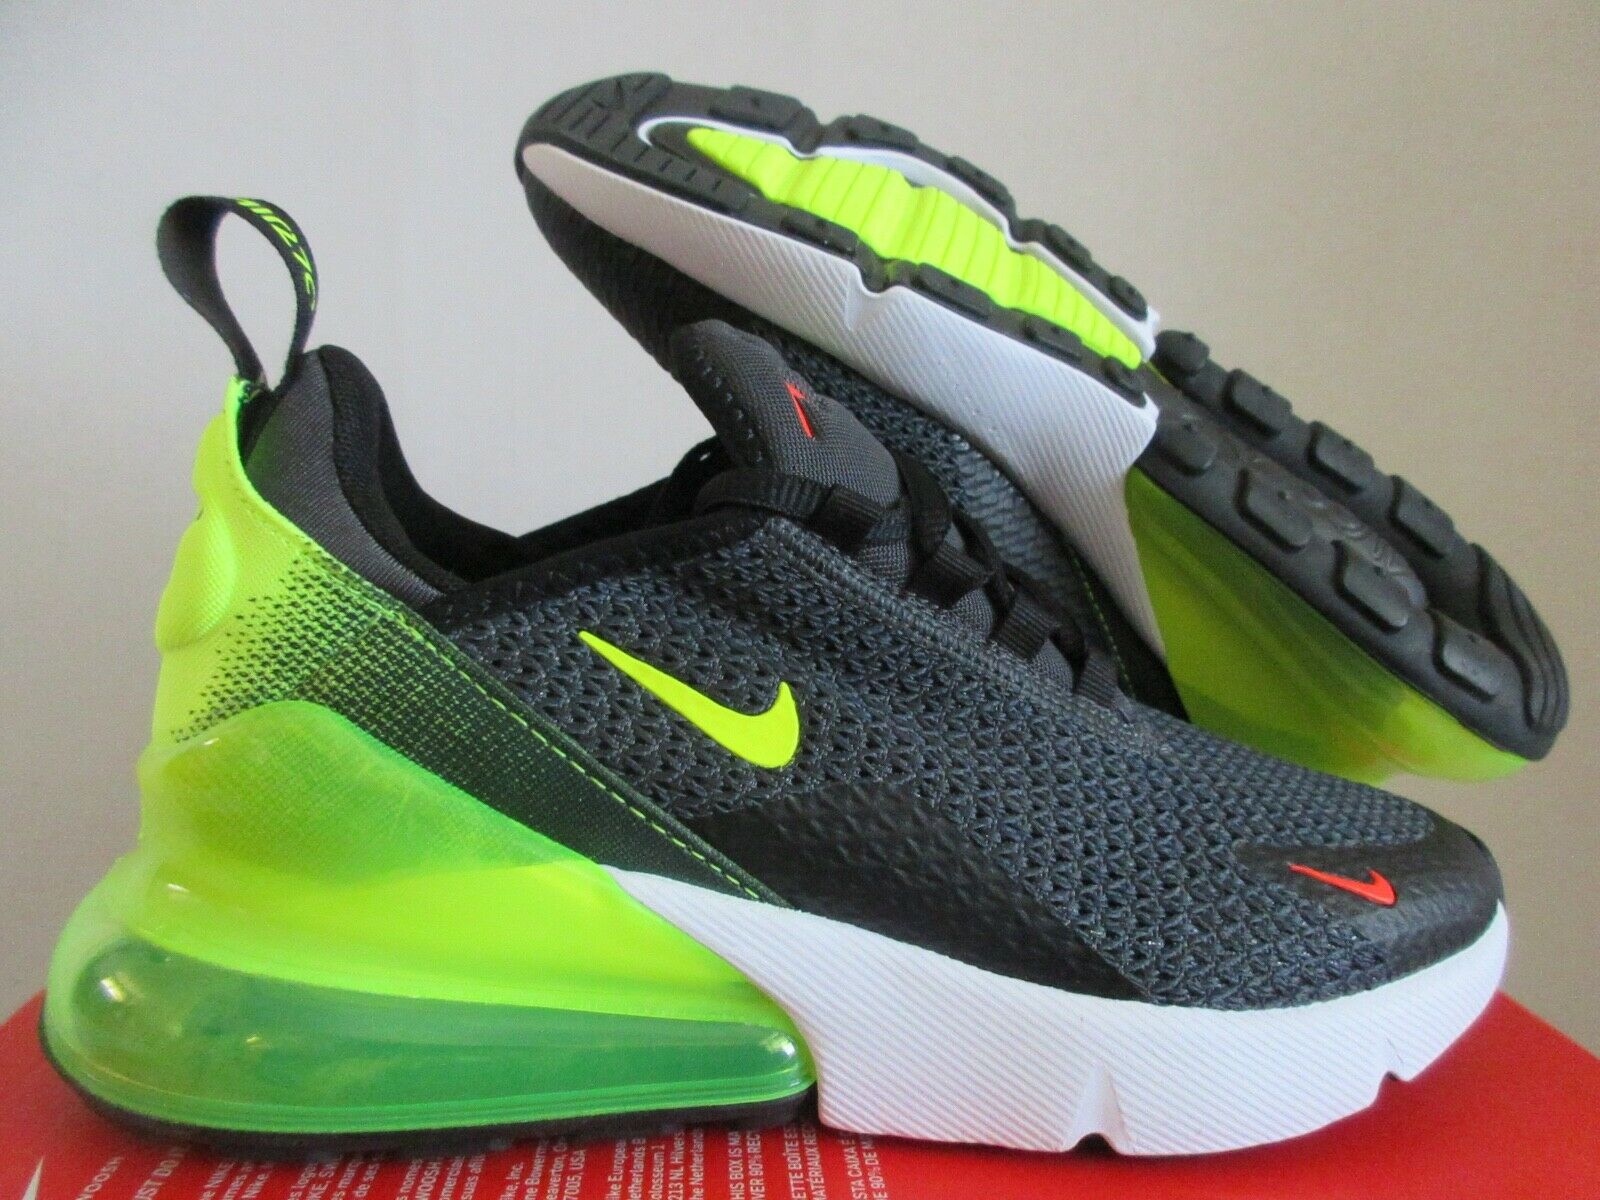 Nike Air Max 270 (gs) Big Kids Shoes Size 6.5y Anthracite Style Av5141 001 online